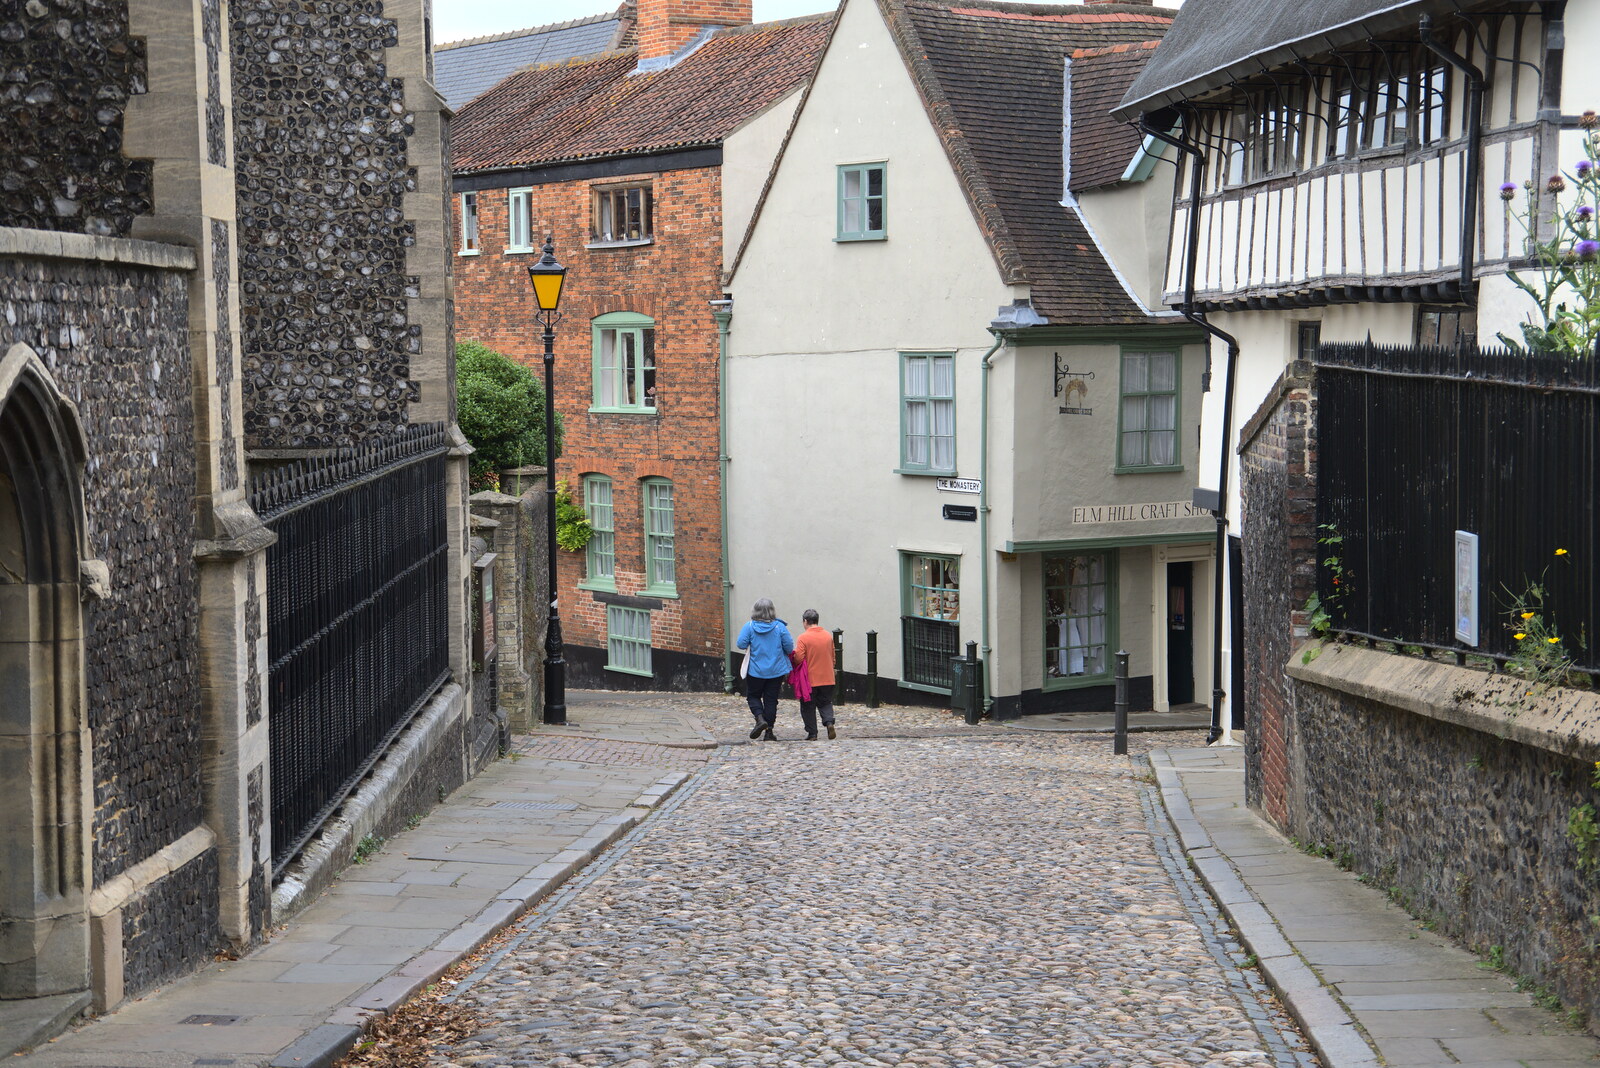 On Elm Hill from Dippy and the City Dinosaur Trail, Norwich, Norfolk - 19th August 2021